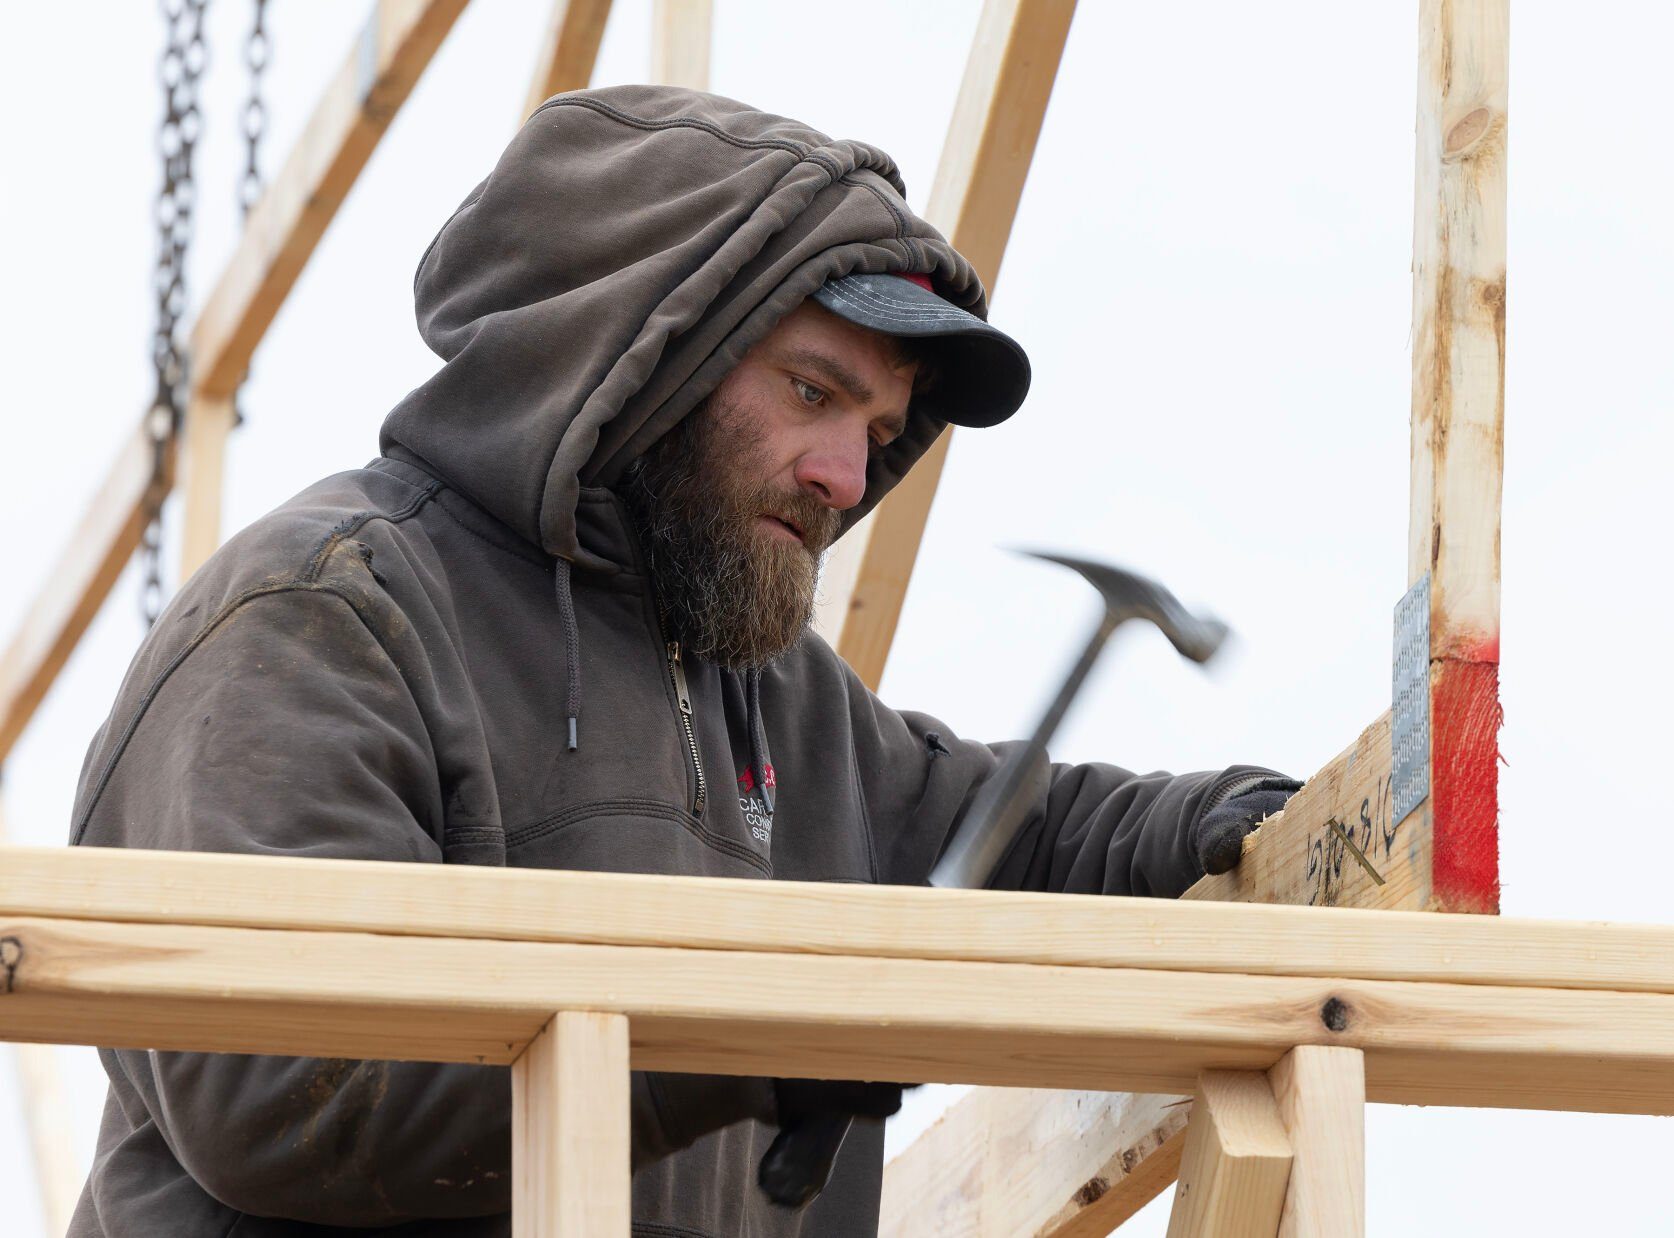 Nate Lange, with Carpenters Construction Services Inc., sets a roof joist into place at a home in Kieler, Wis.    PHOTO CREDIT: Stephen Gassman
Telegraph Herald